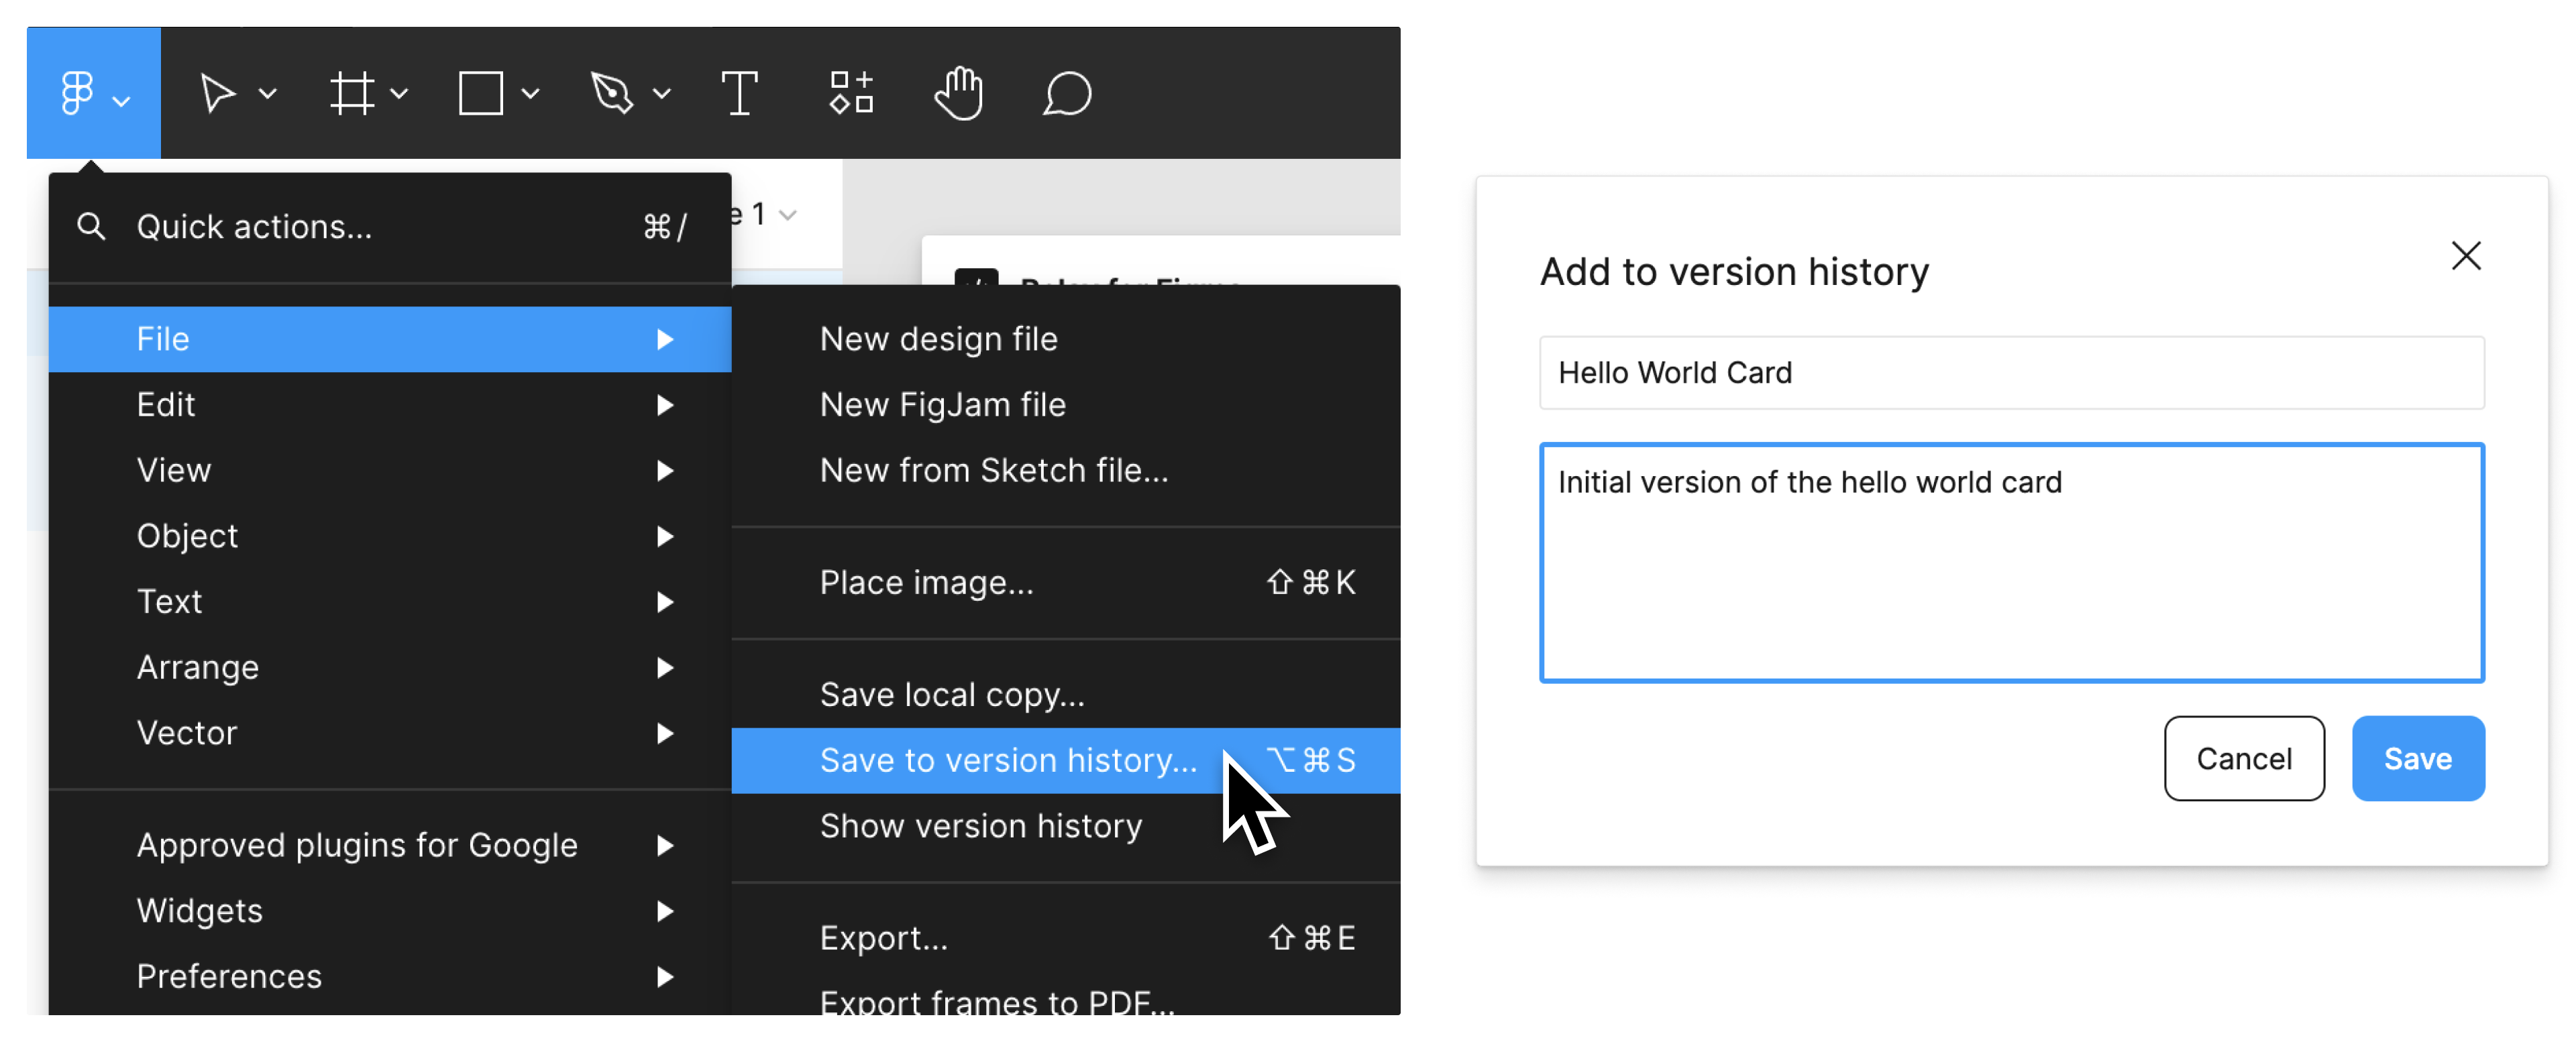 Save to version history in Figma